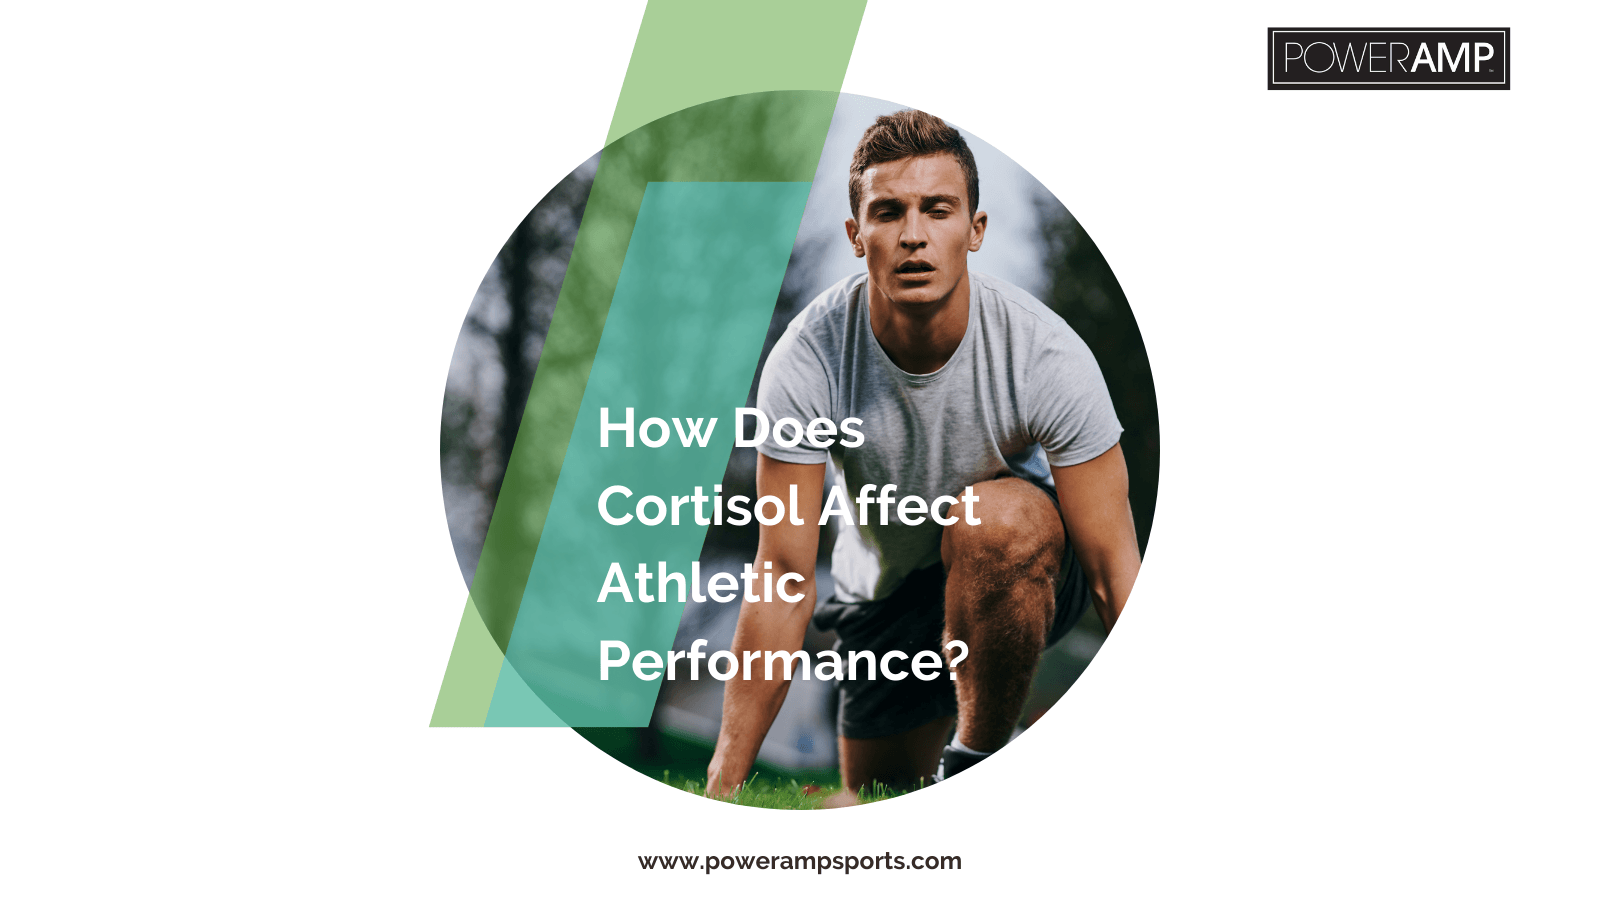 How Does Cortisol Affect Athletic Performance?